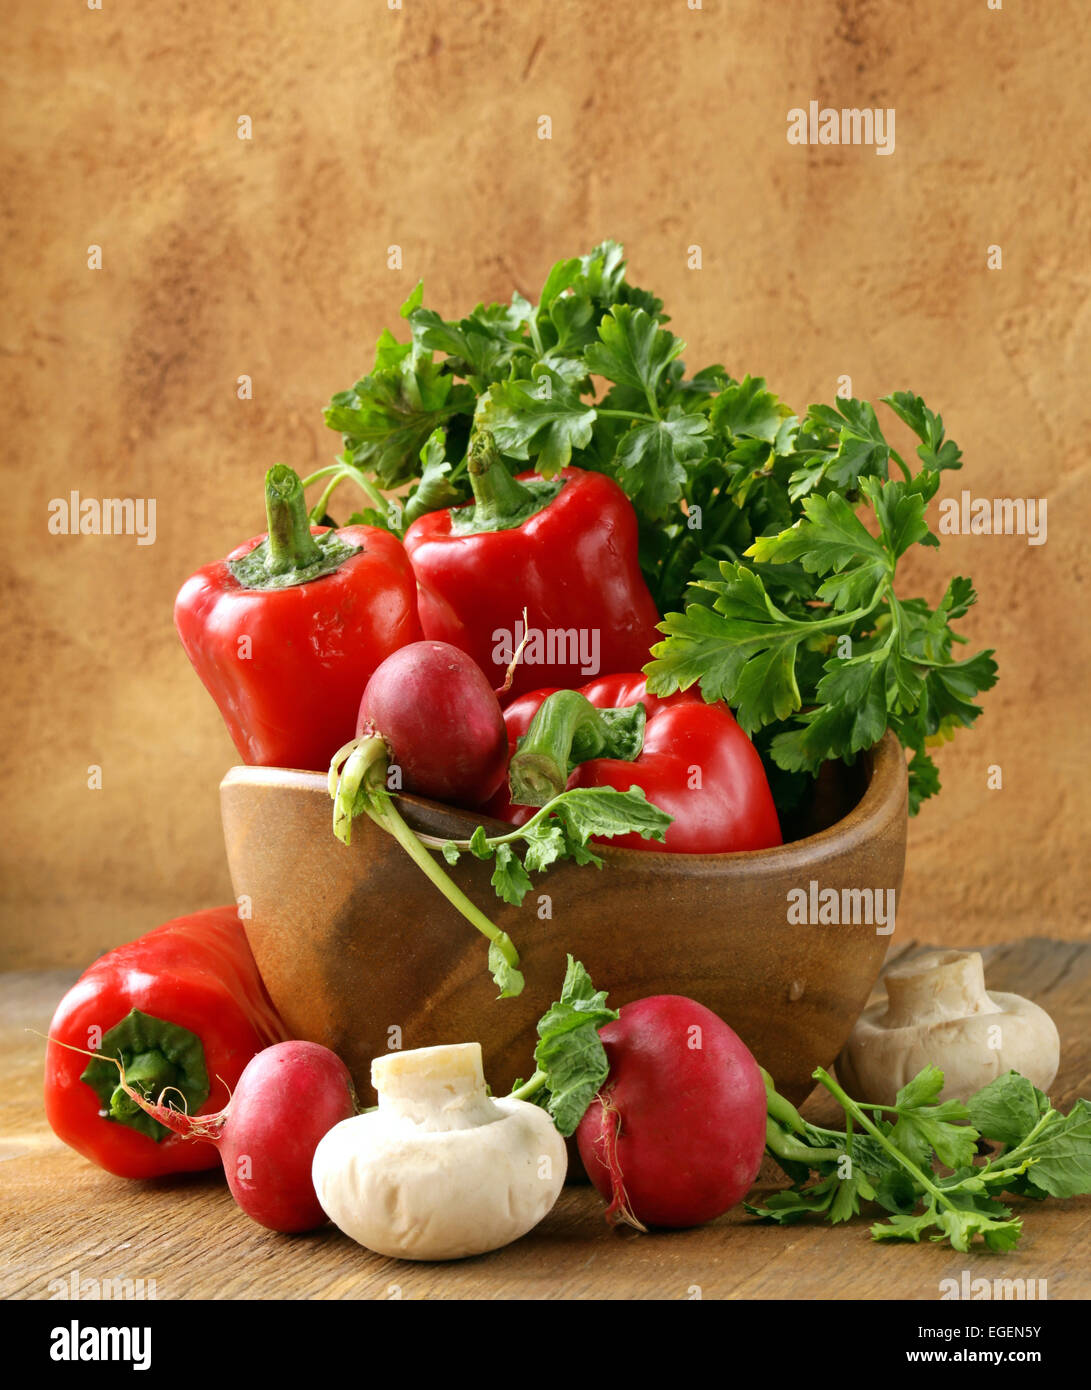 Mix vegetables (tomatoes, cucumbers, mushrooms, herbs) on a wooden table Stock Photo